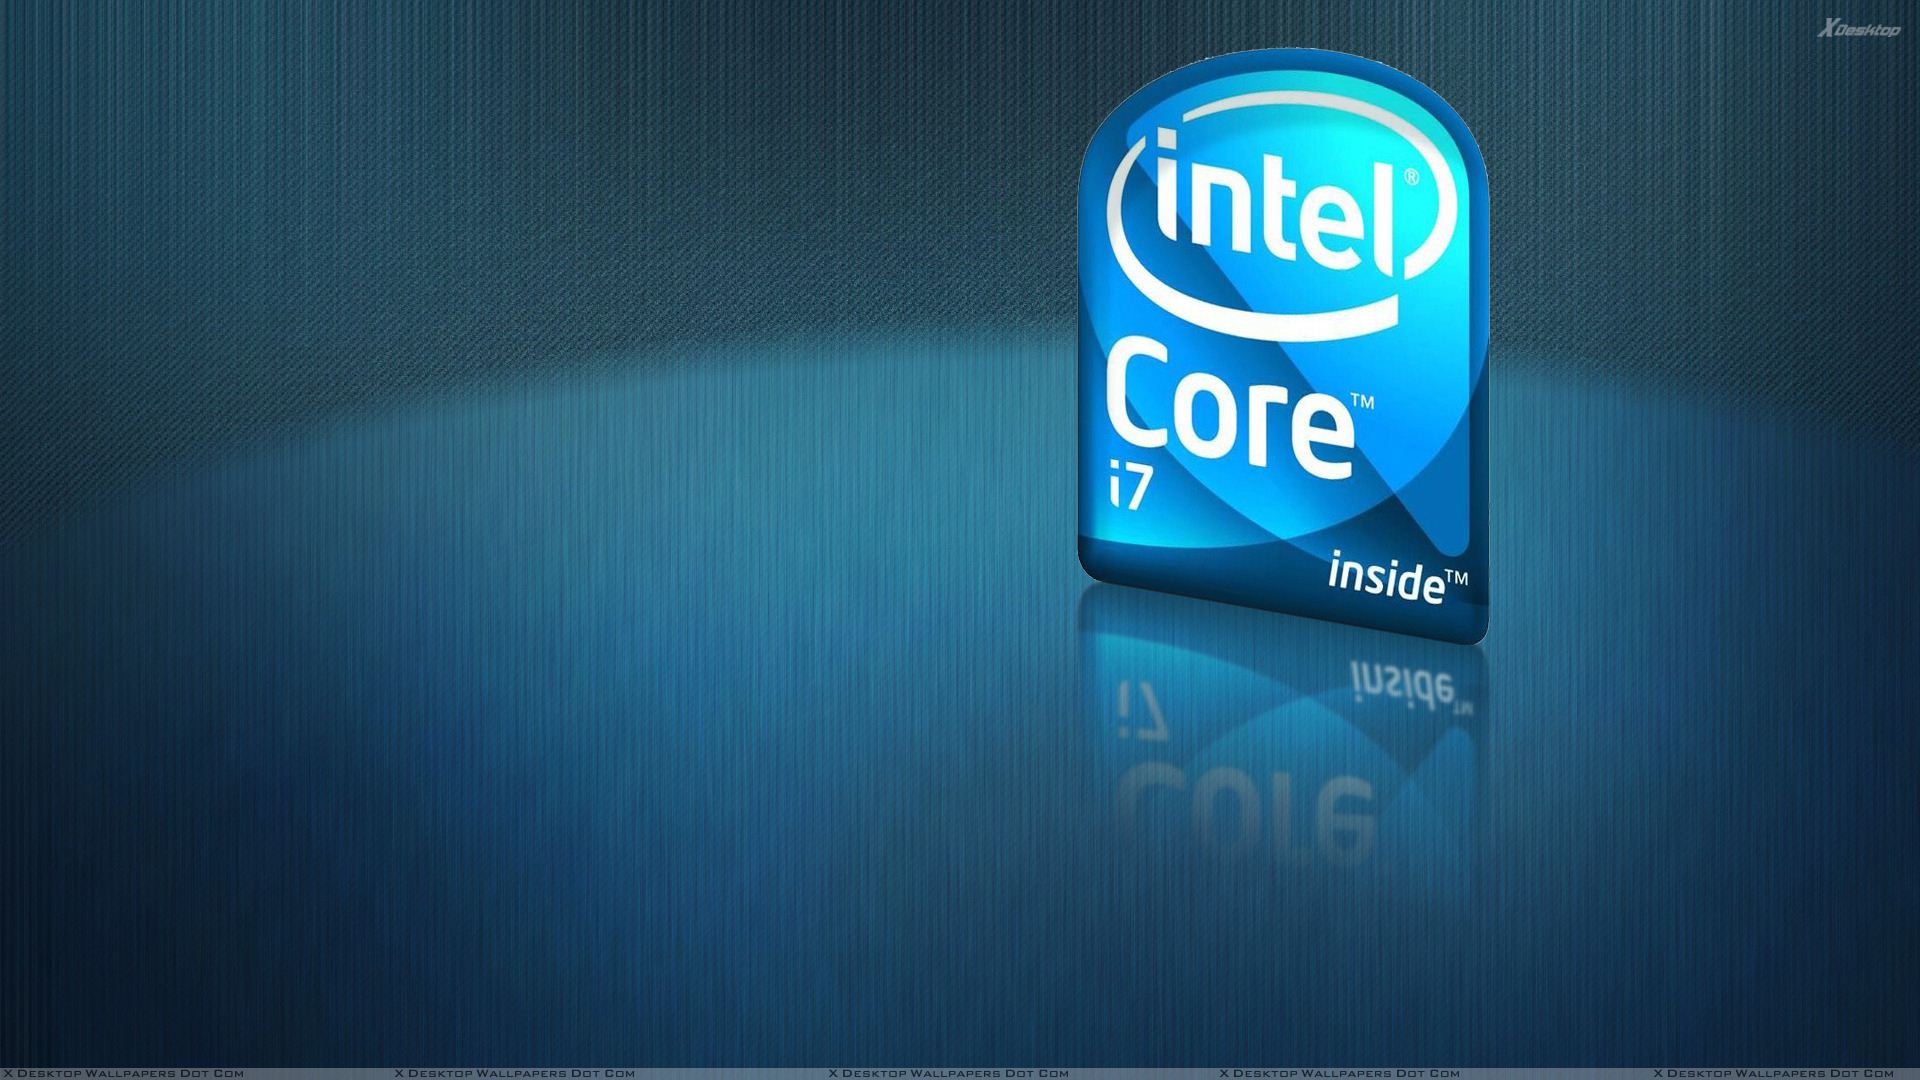 Intel Core i7 Logo And Blue Background Wallpaper